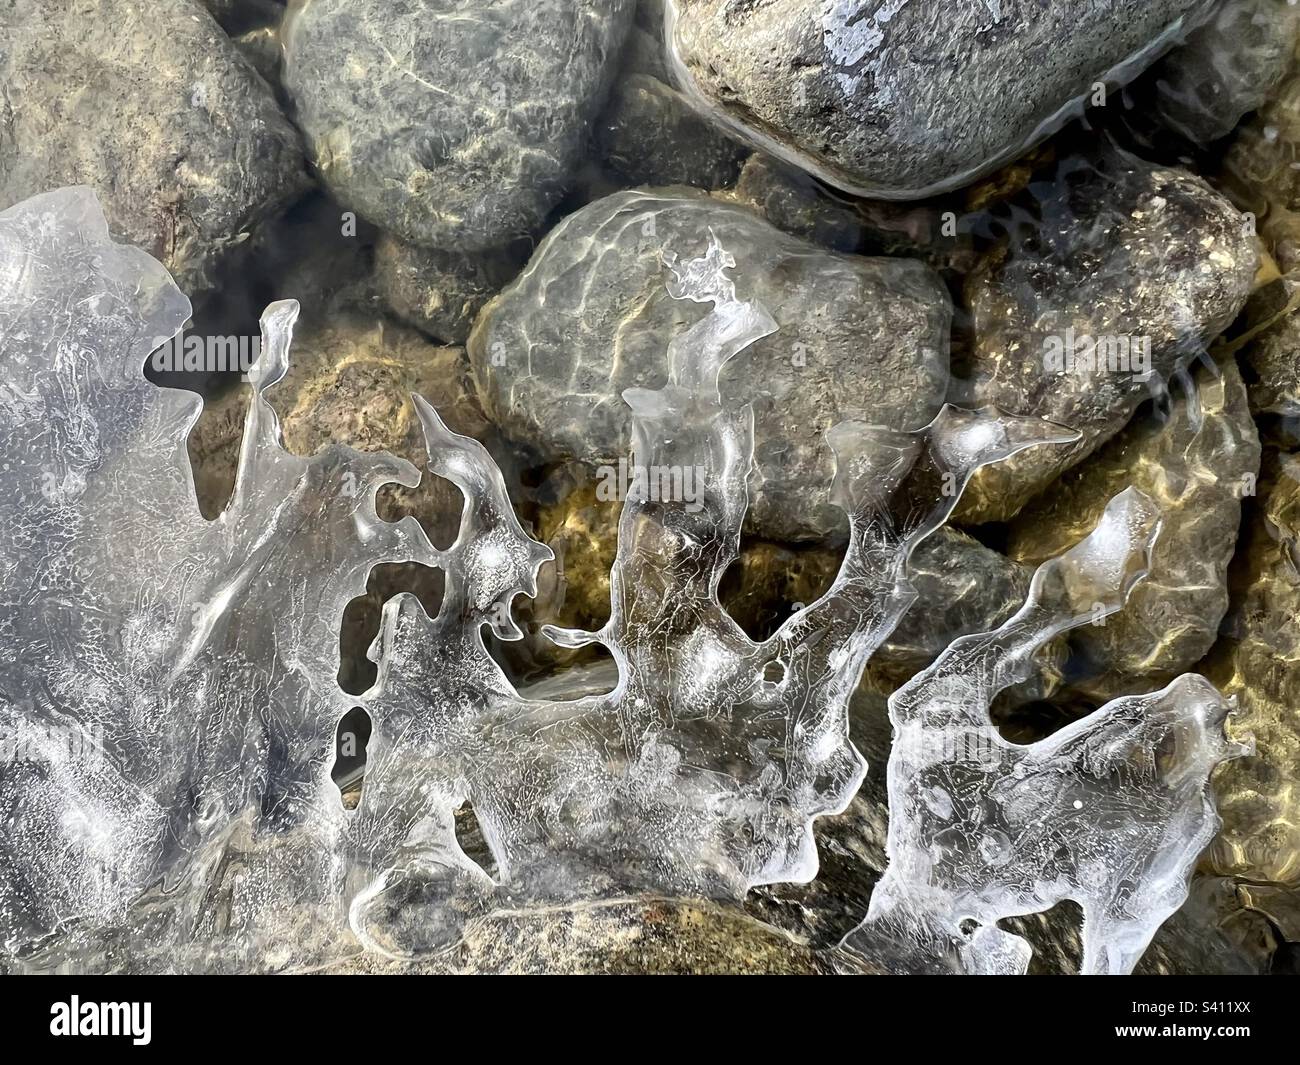 Filigree ice sculptures in a river with the sun reflecting on rocks beneath. The ice formations beautifully demonstrate nature’s elegance. Stock Photo